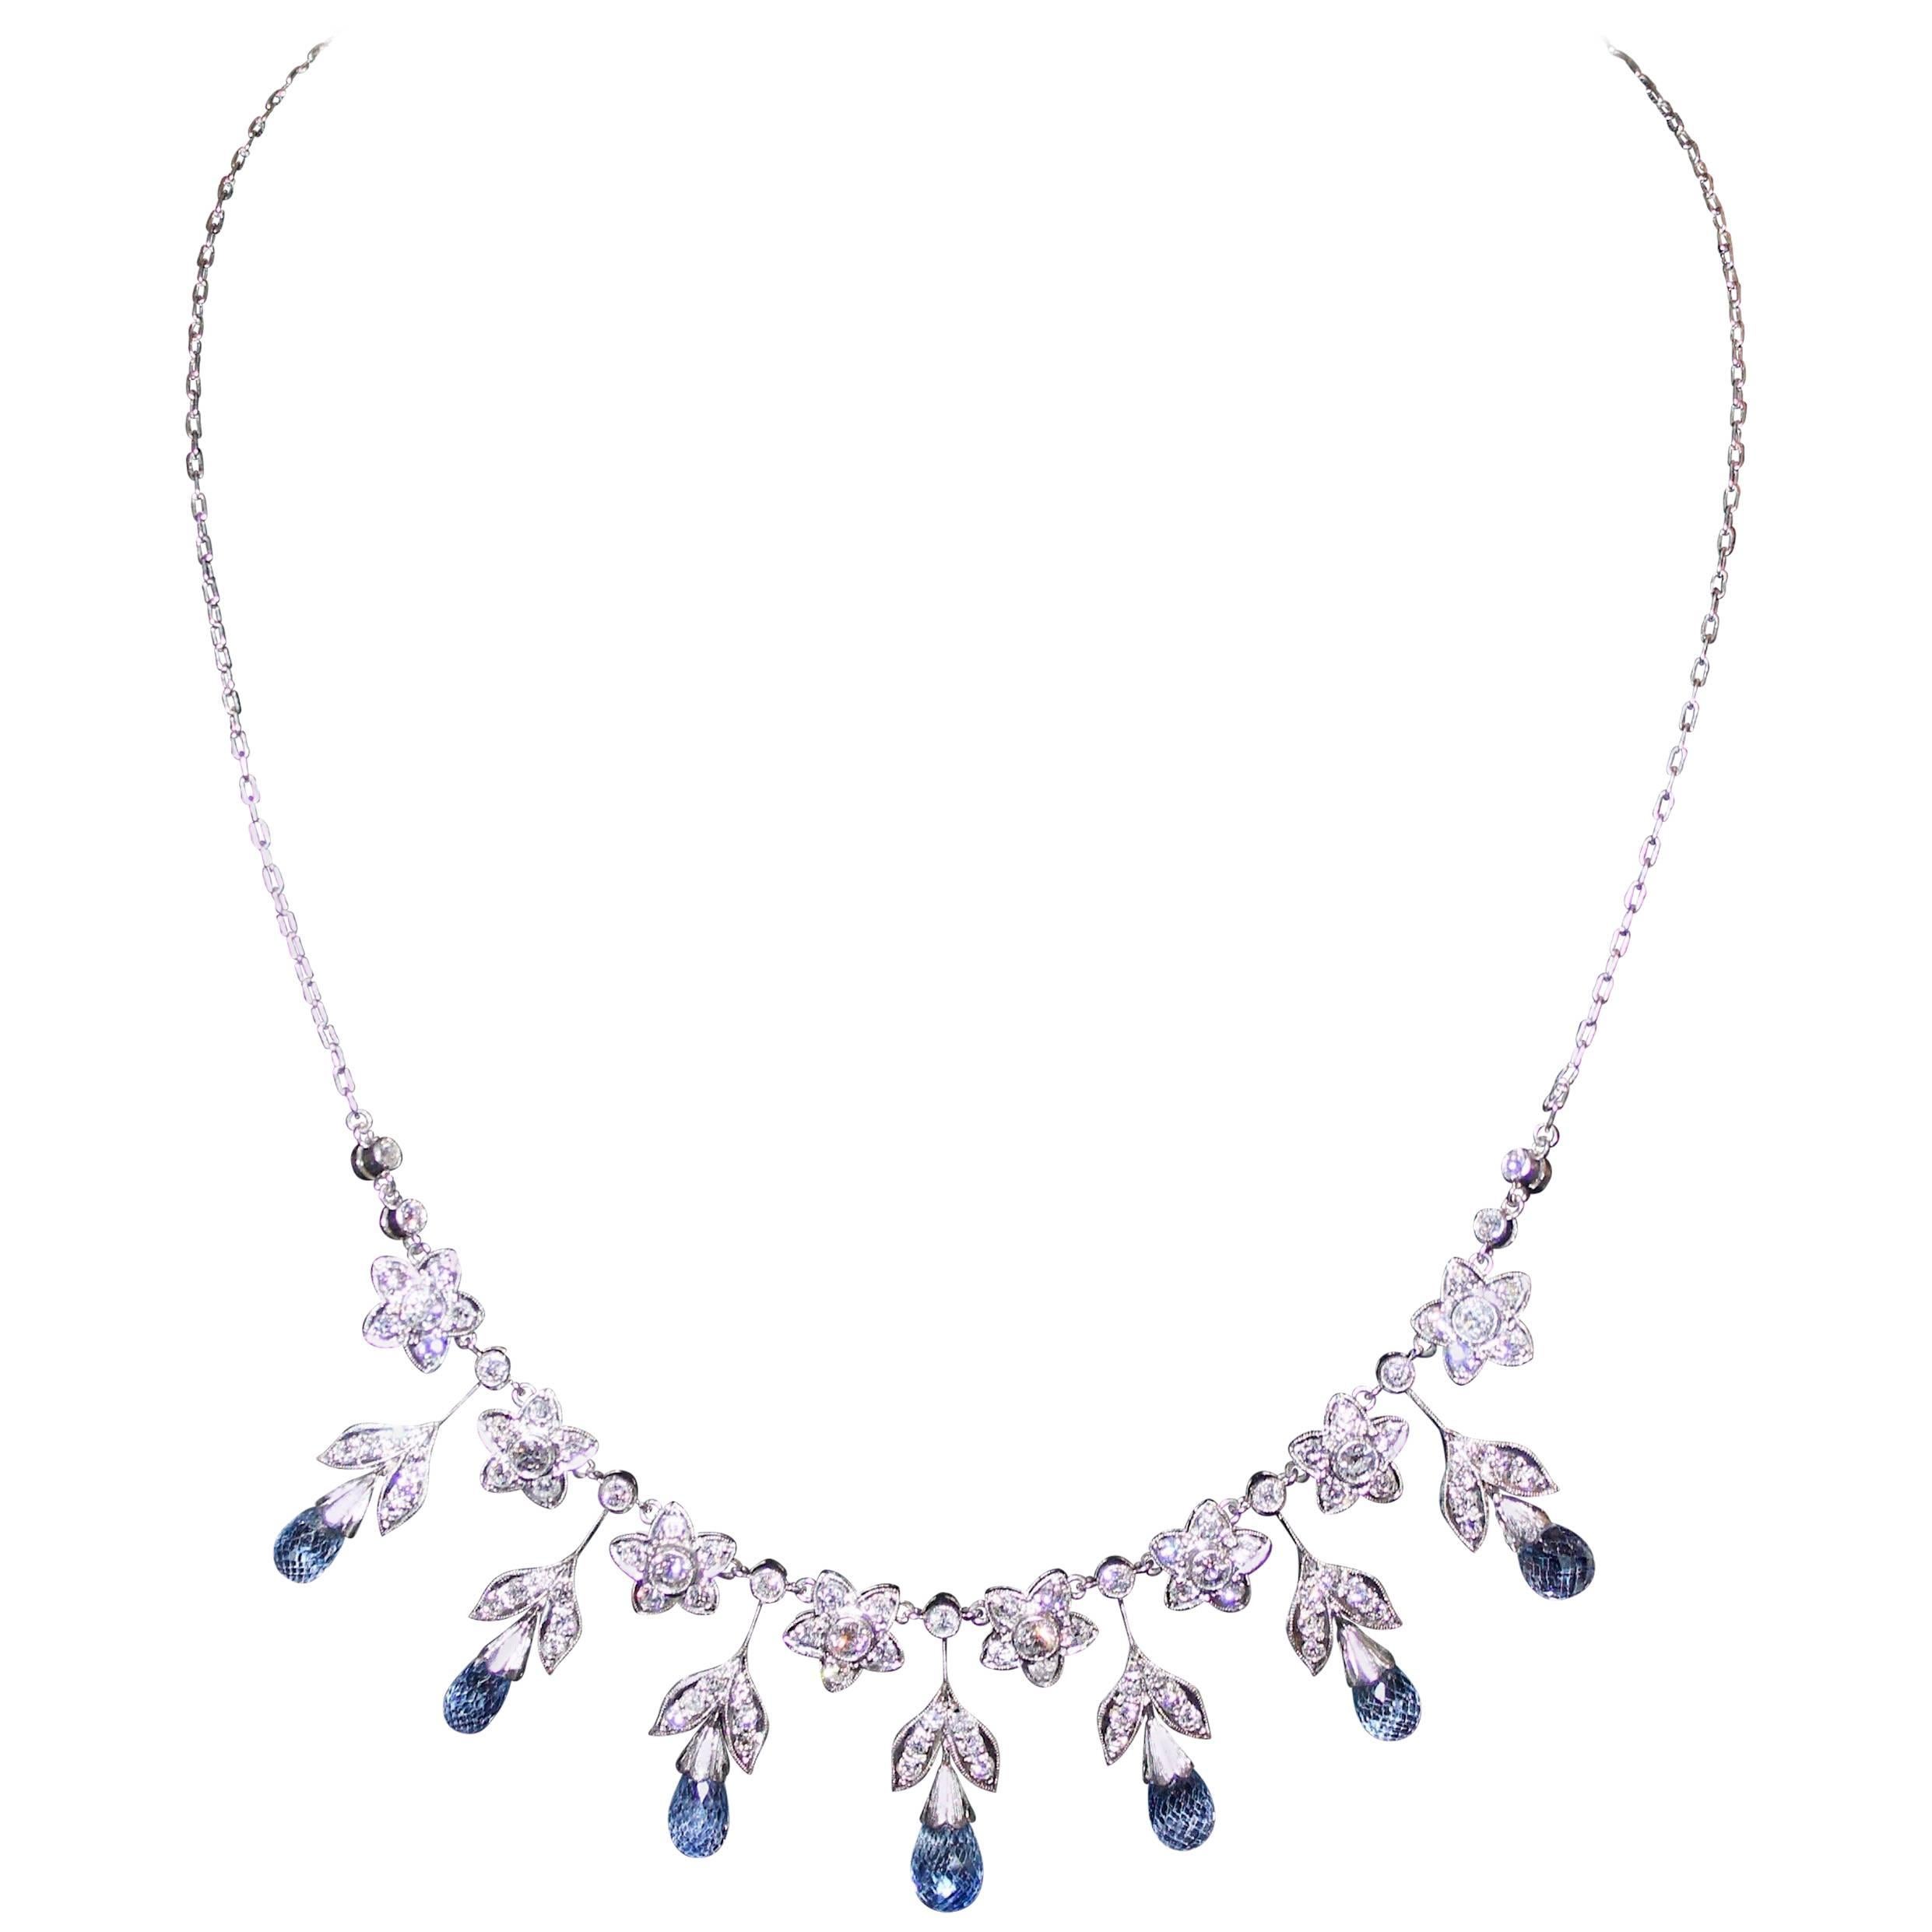 Elegant Dangling Sapphire and Diamond, 1930s Necklace